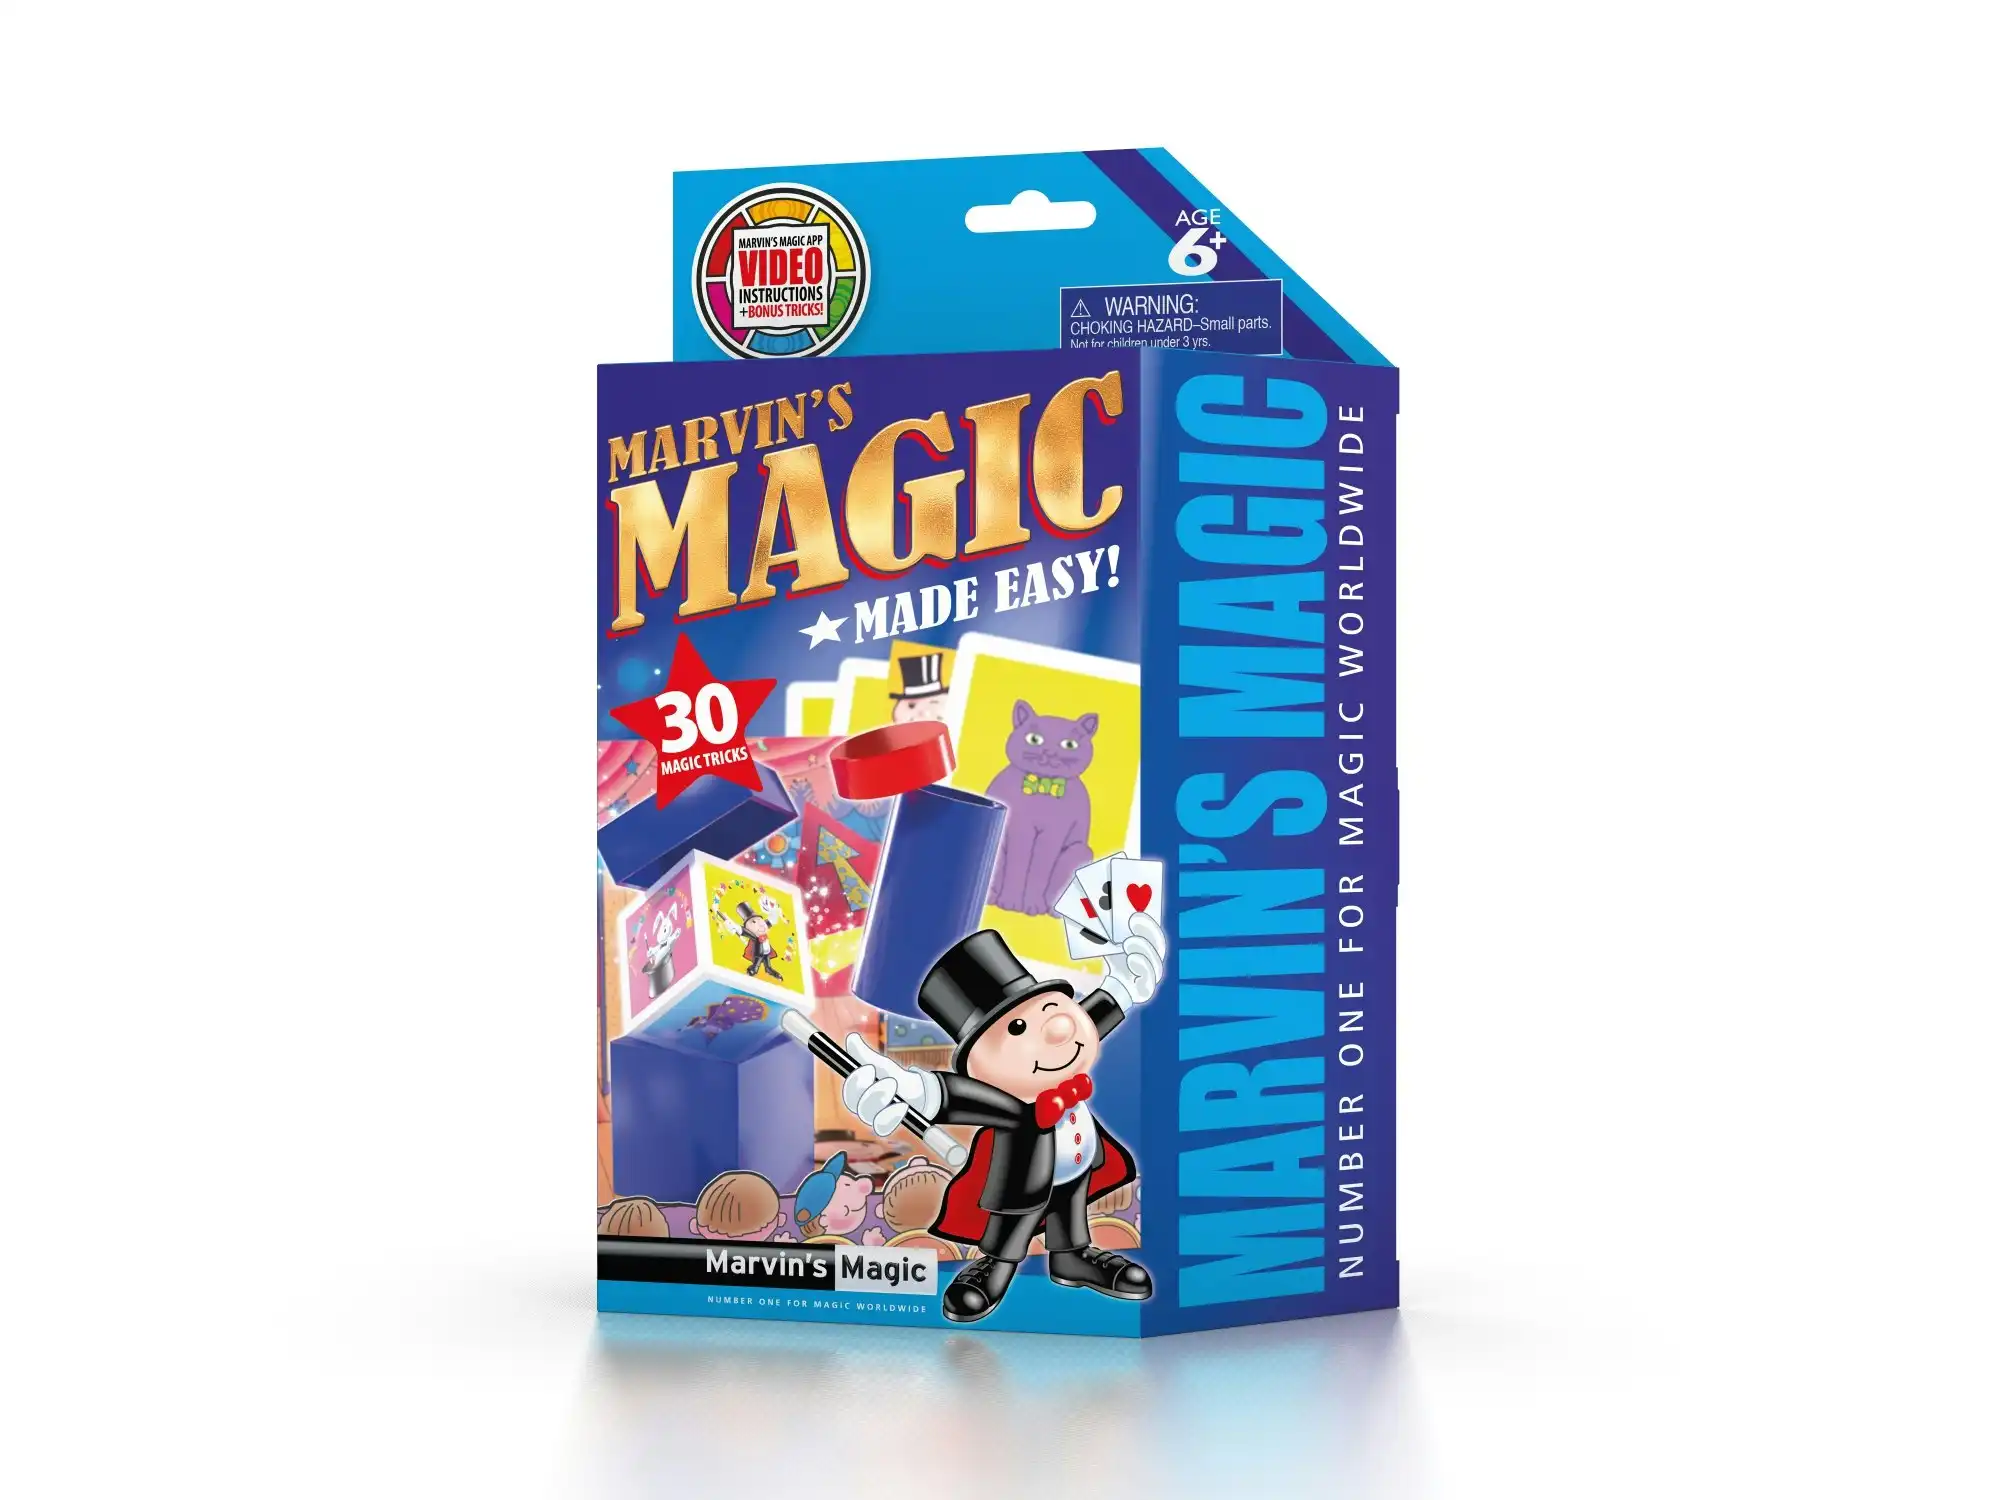 Marvin's Magic Amazing Tricks for beginners Set 1